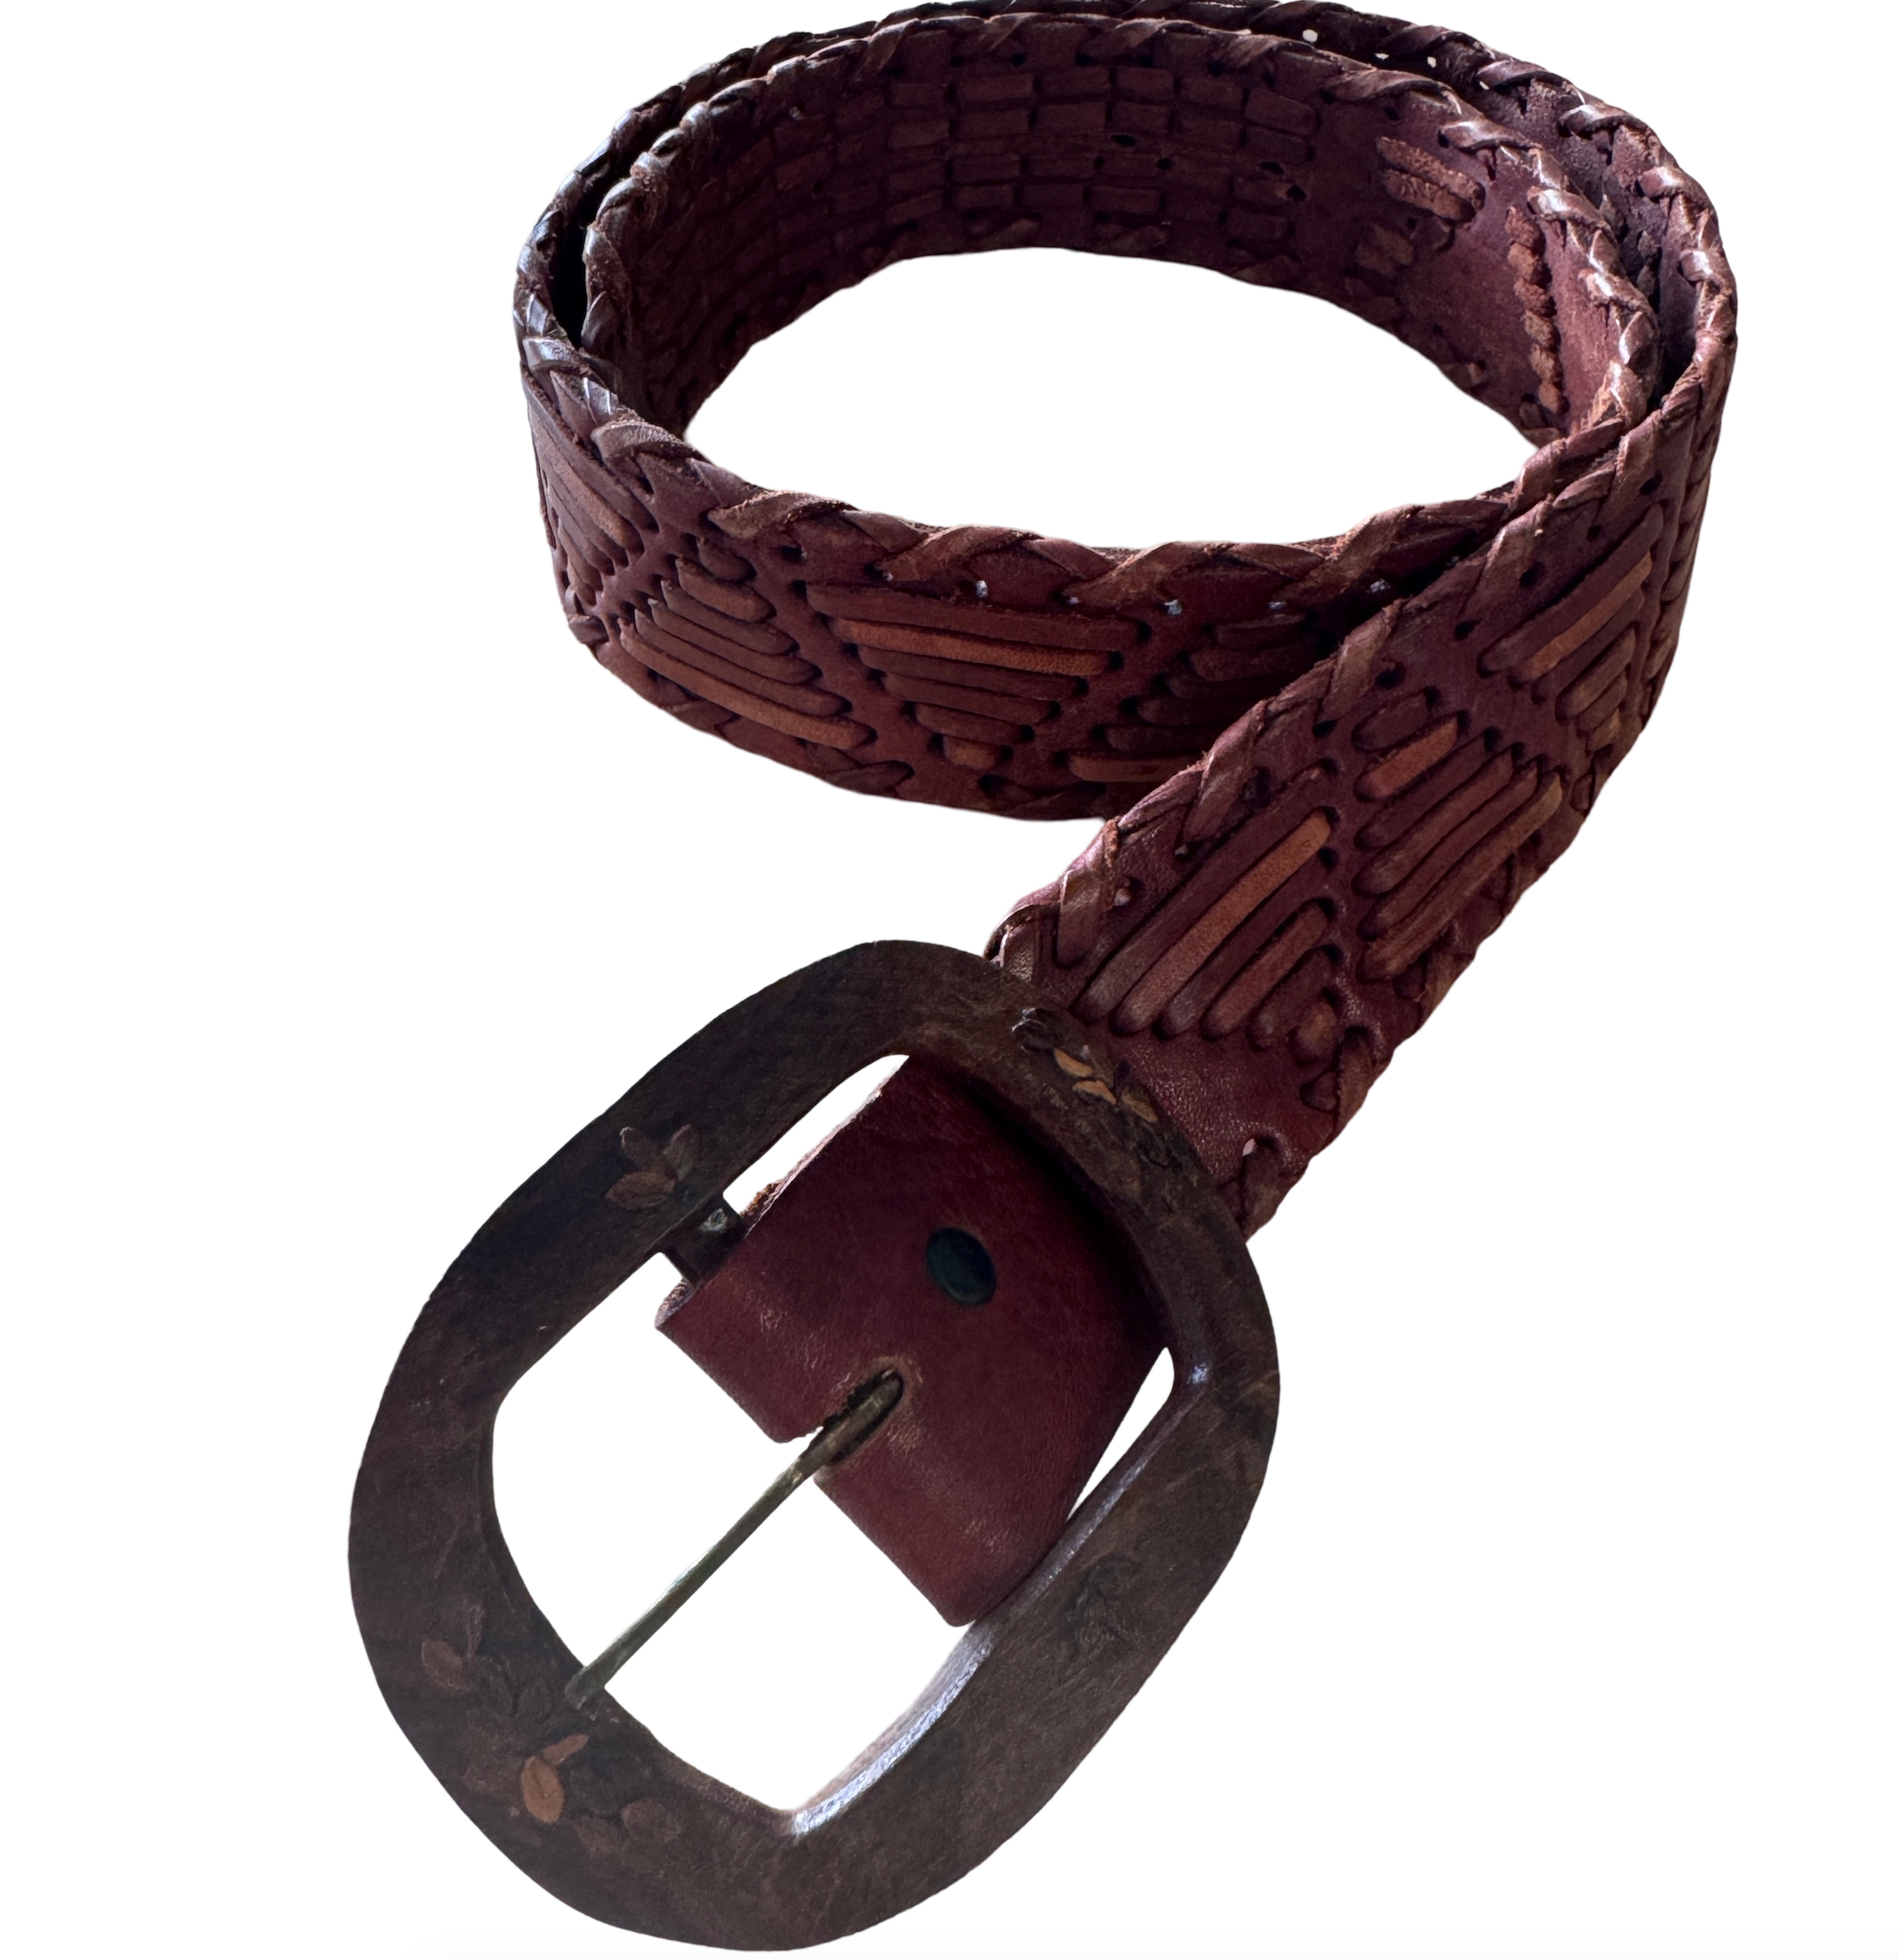 Marketplace 70s Braided Belt With Wooden Buckle In Brown